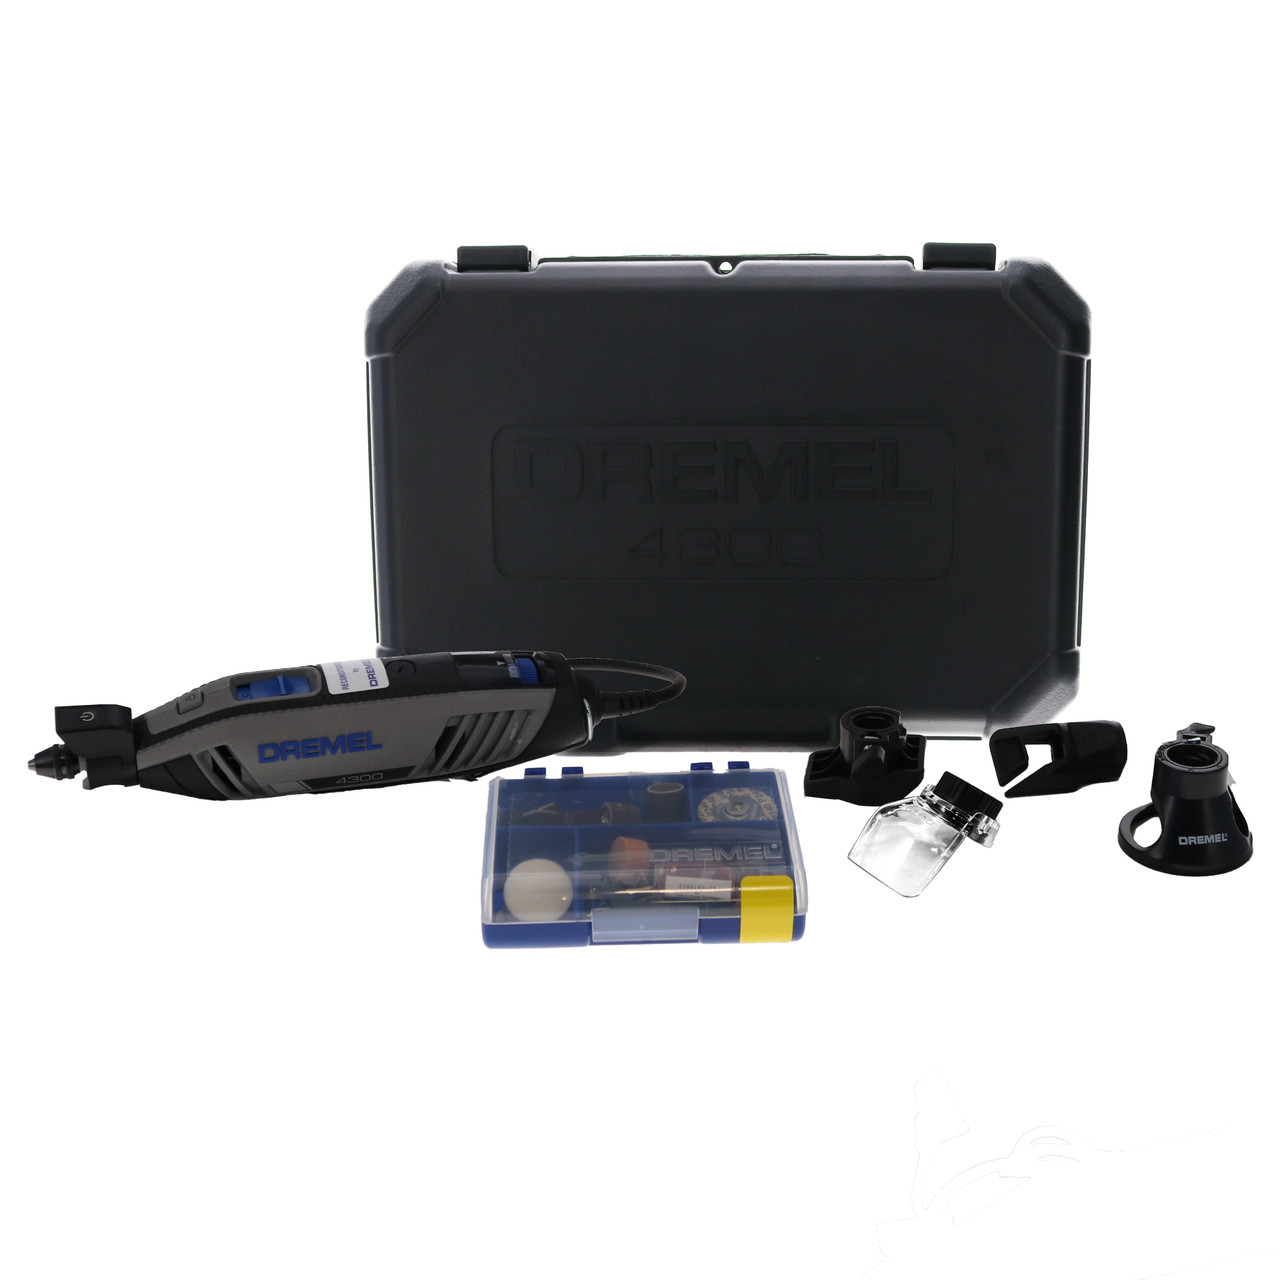 Dremel 120 Volt Electric Rotary Tool Kit 15,000 To 35,000 Rpm, 1.15 Amps